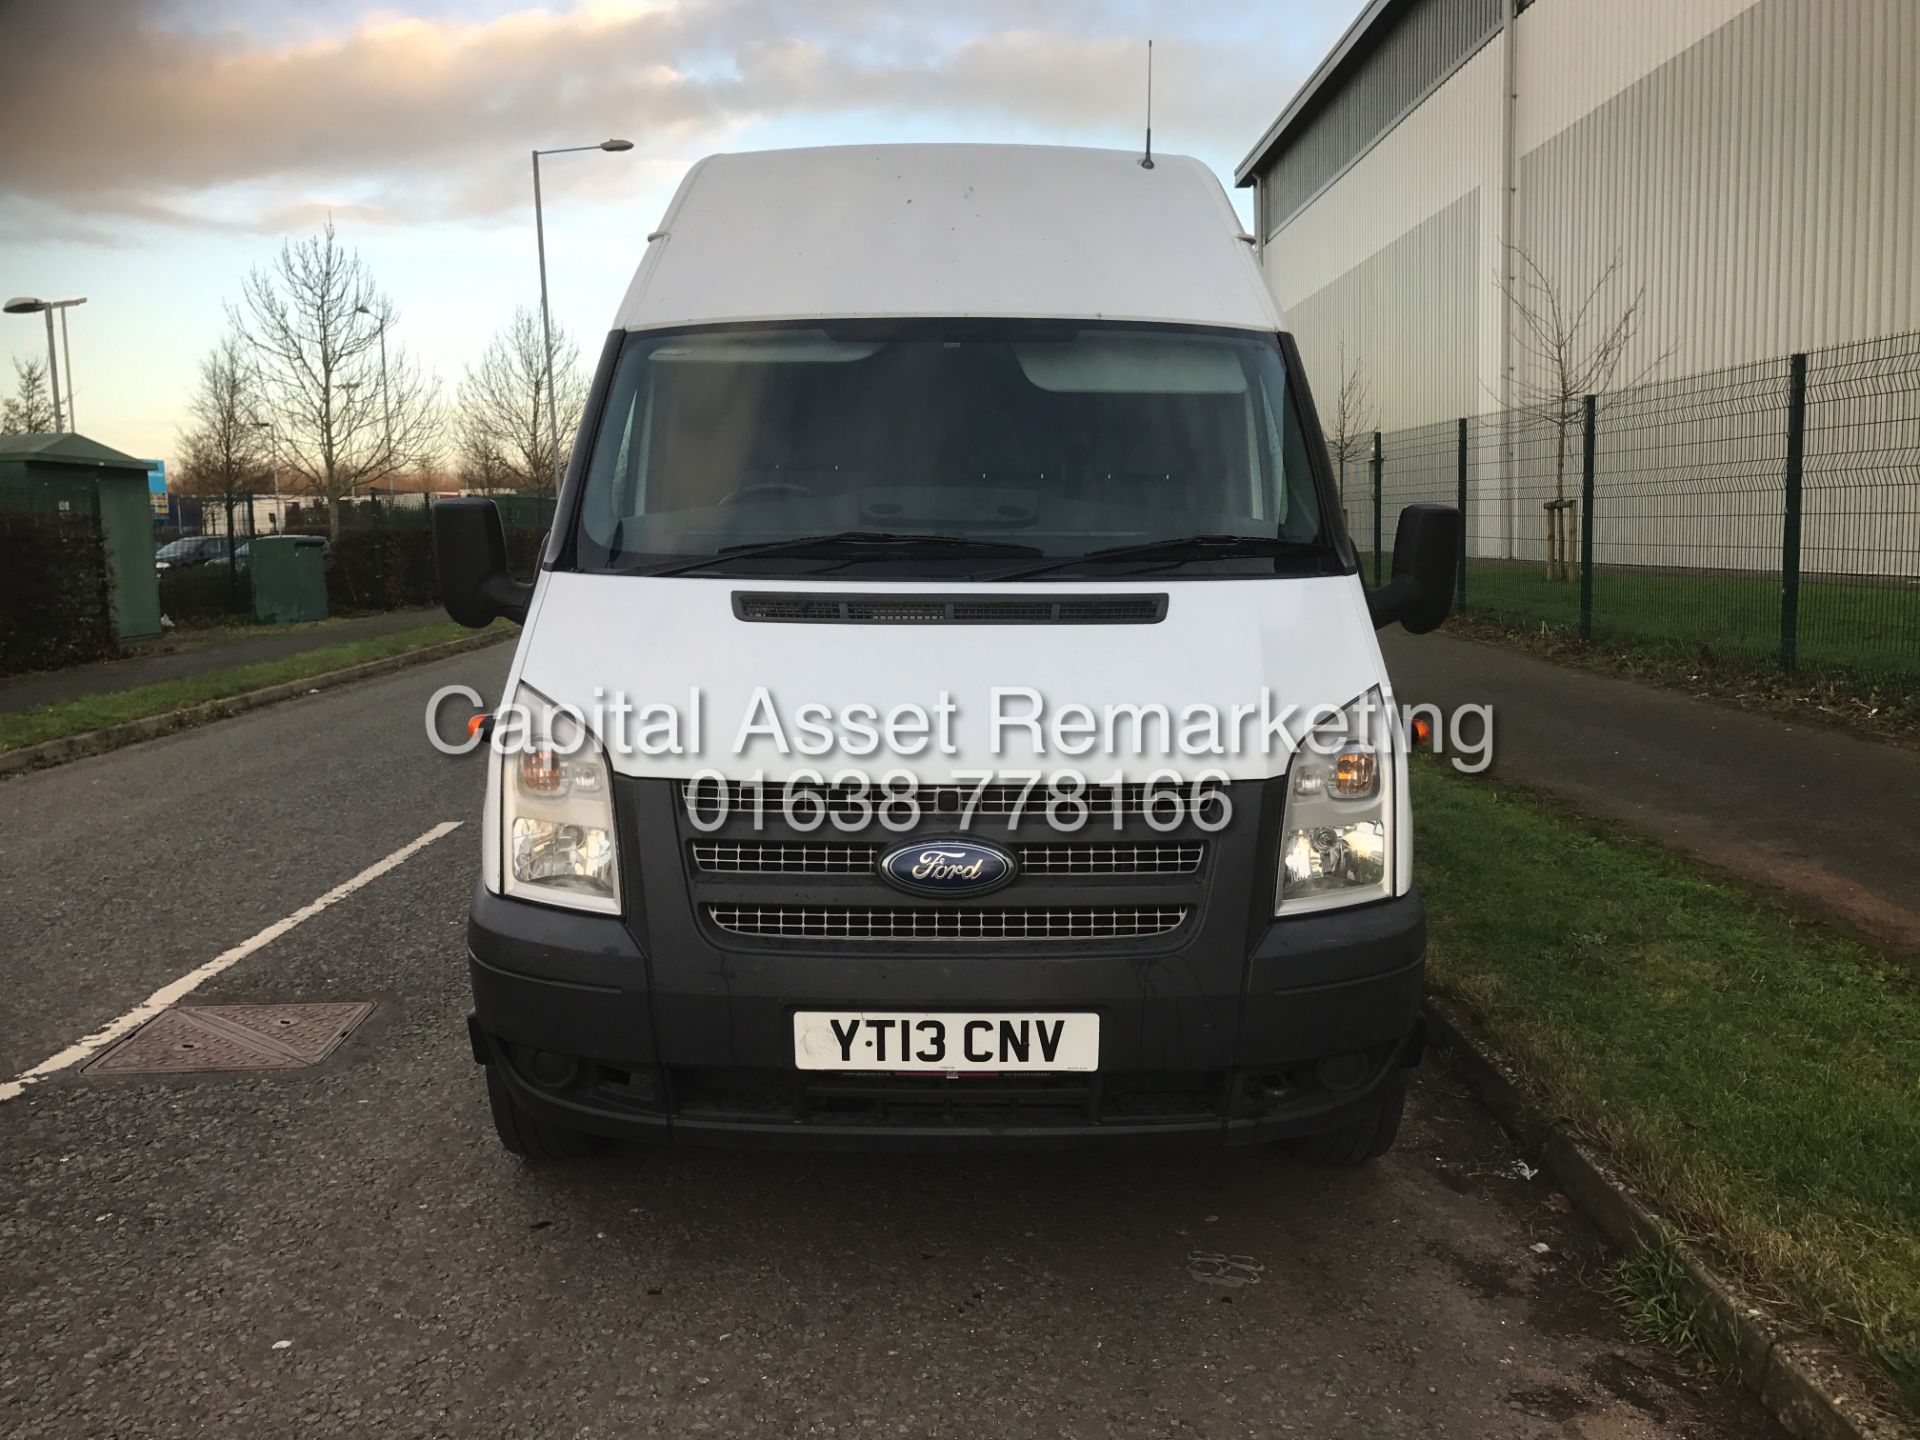 FORD TRANSIT T350 (125) XLWB "JUMBO" 13 REG - 1 OWNER - LOW MILES - MASSIVE LOADING SPACE - WOW!!! - Image 7 of 13